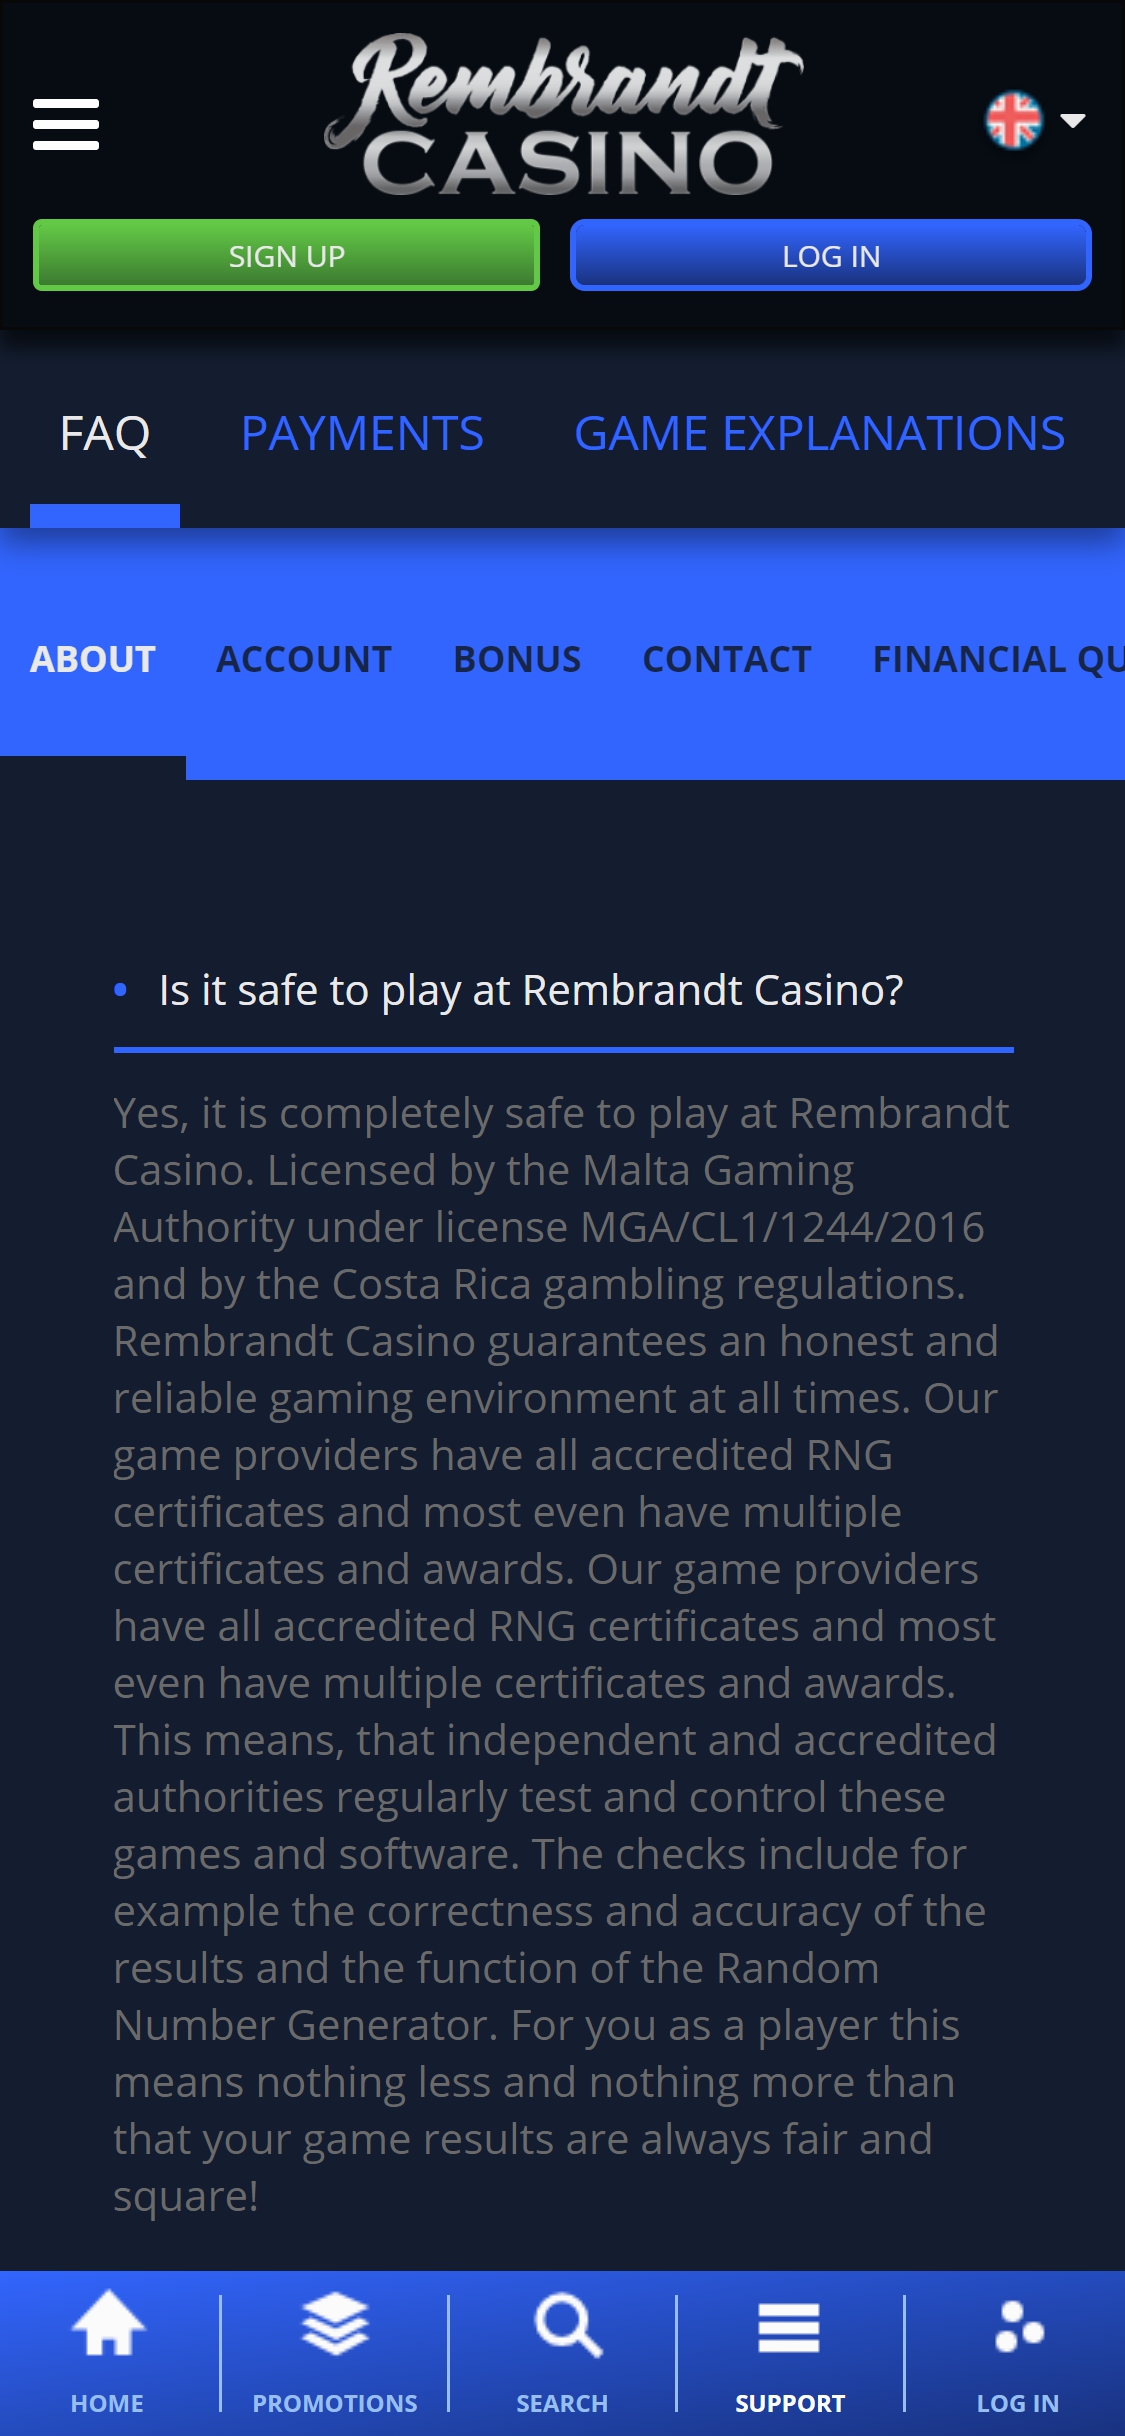 Rembrandt Casino Mobile Support Review